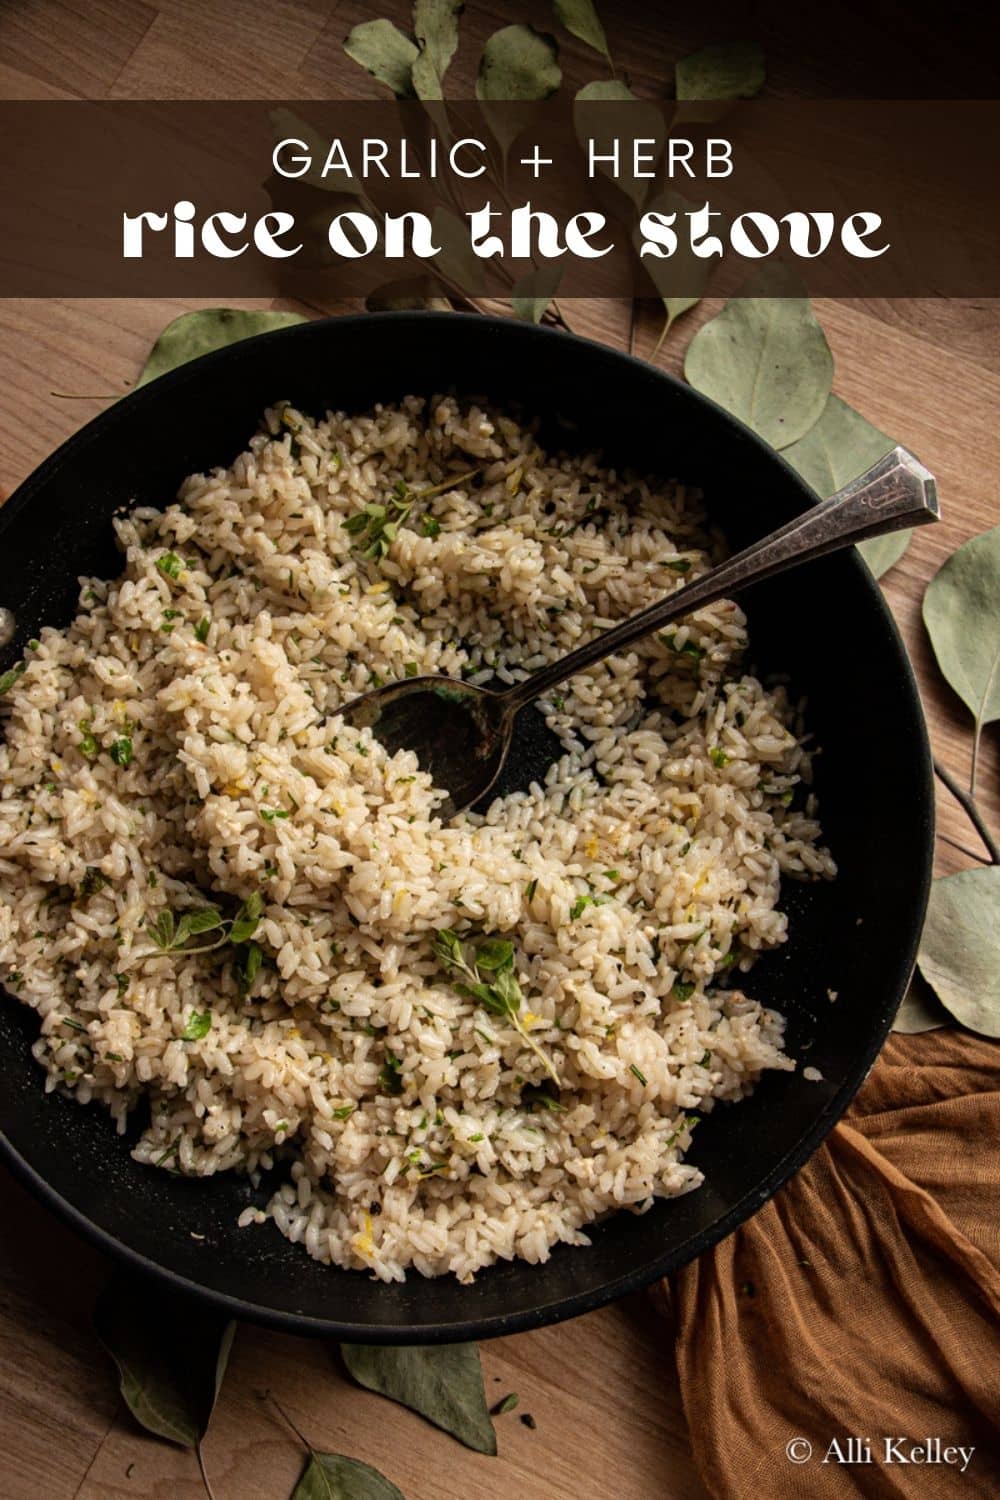 Garlic and herb rice is the perfect side dish for any occasion! The tasty combination of fragrant herbs, garlic, butter, and rice will add a delicious burst of flavor to your meal times. Ready in no time at all, this easy-to-make recipe will soon be your go-to side dish.